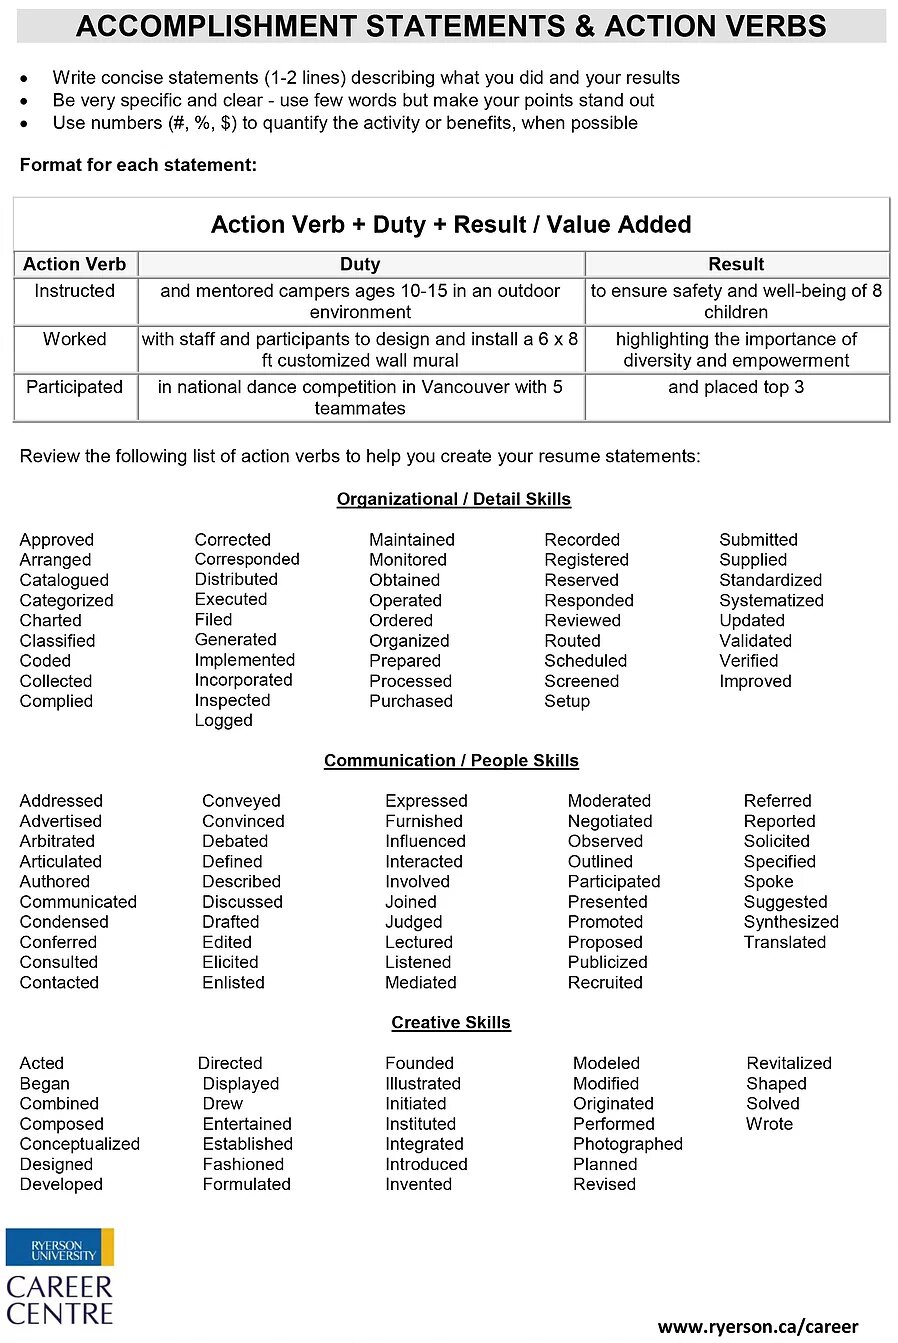 Accomplishment Statements and Action Verbs